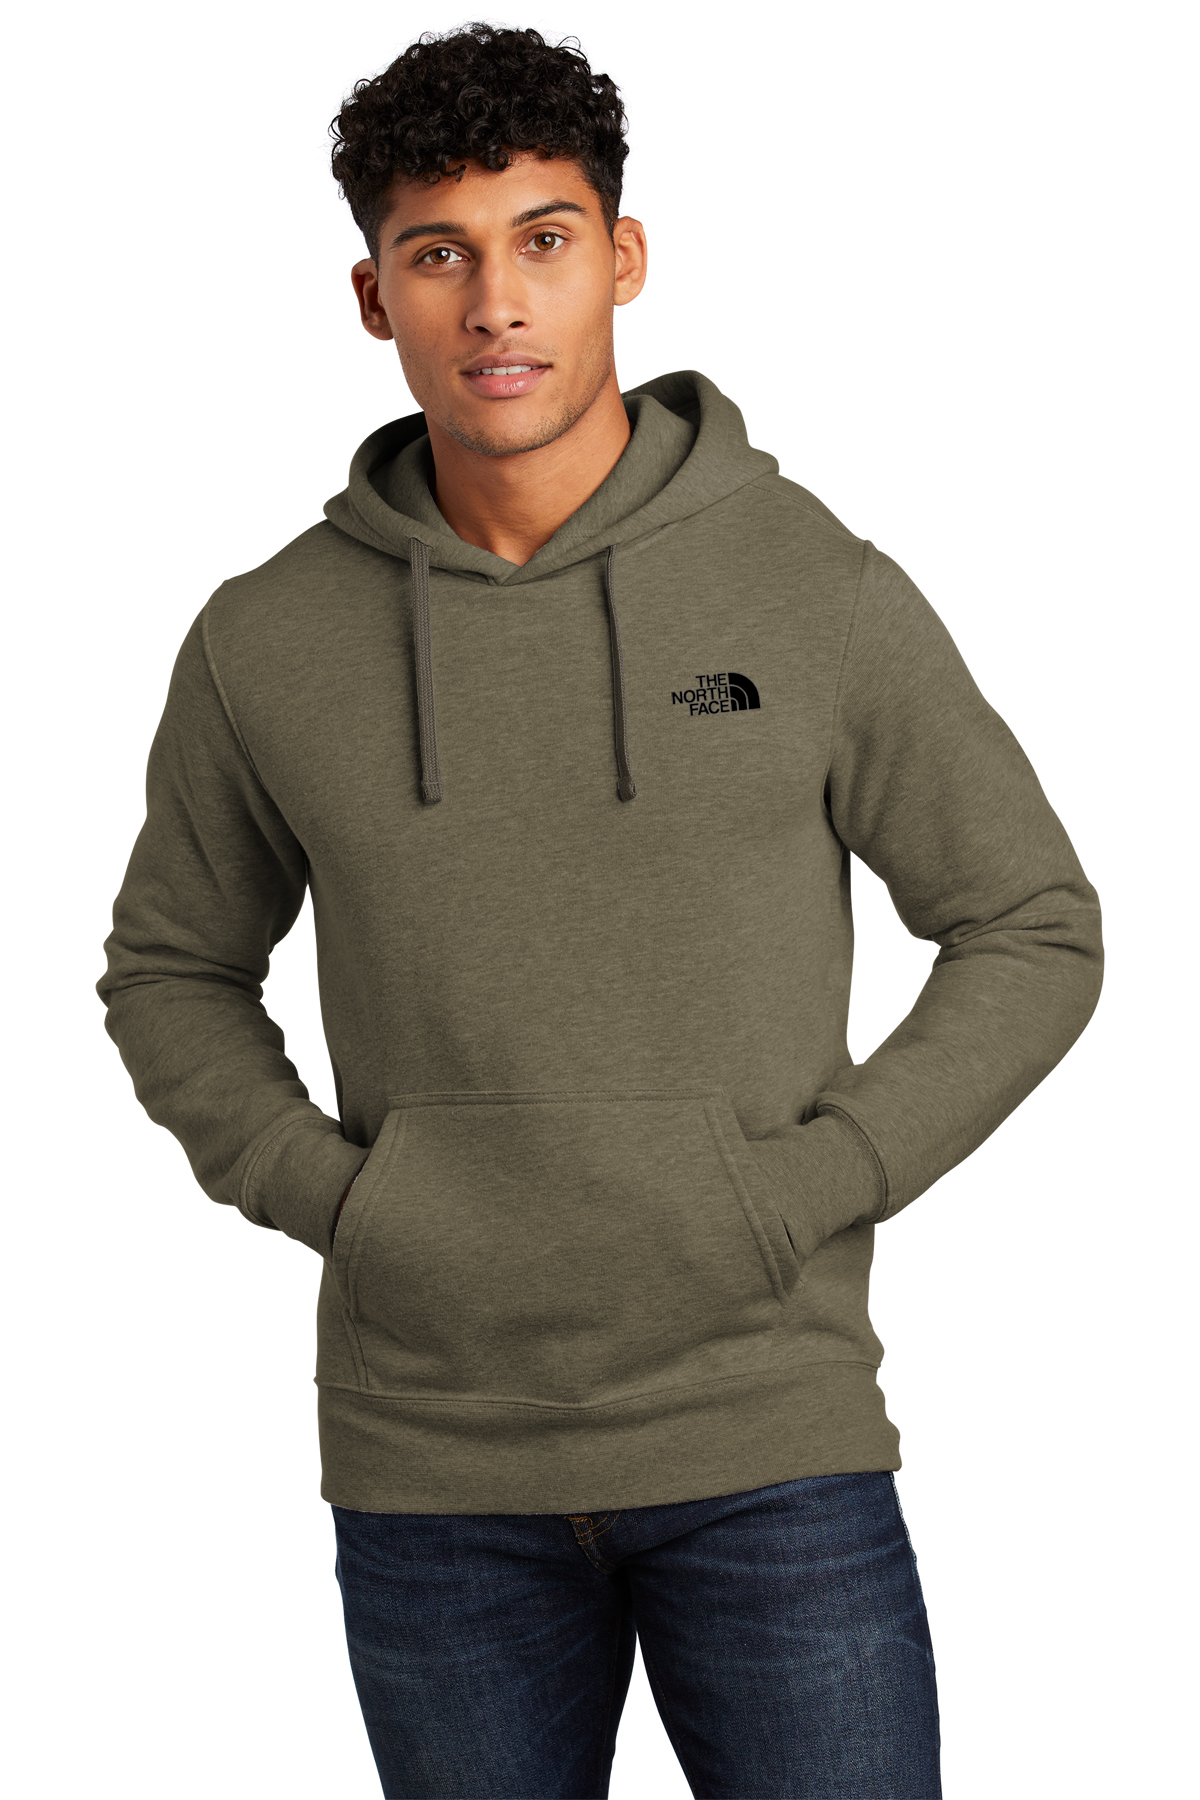 North Face Pullover Hoodie - Chest Logo NF0A7V9B